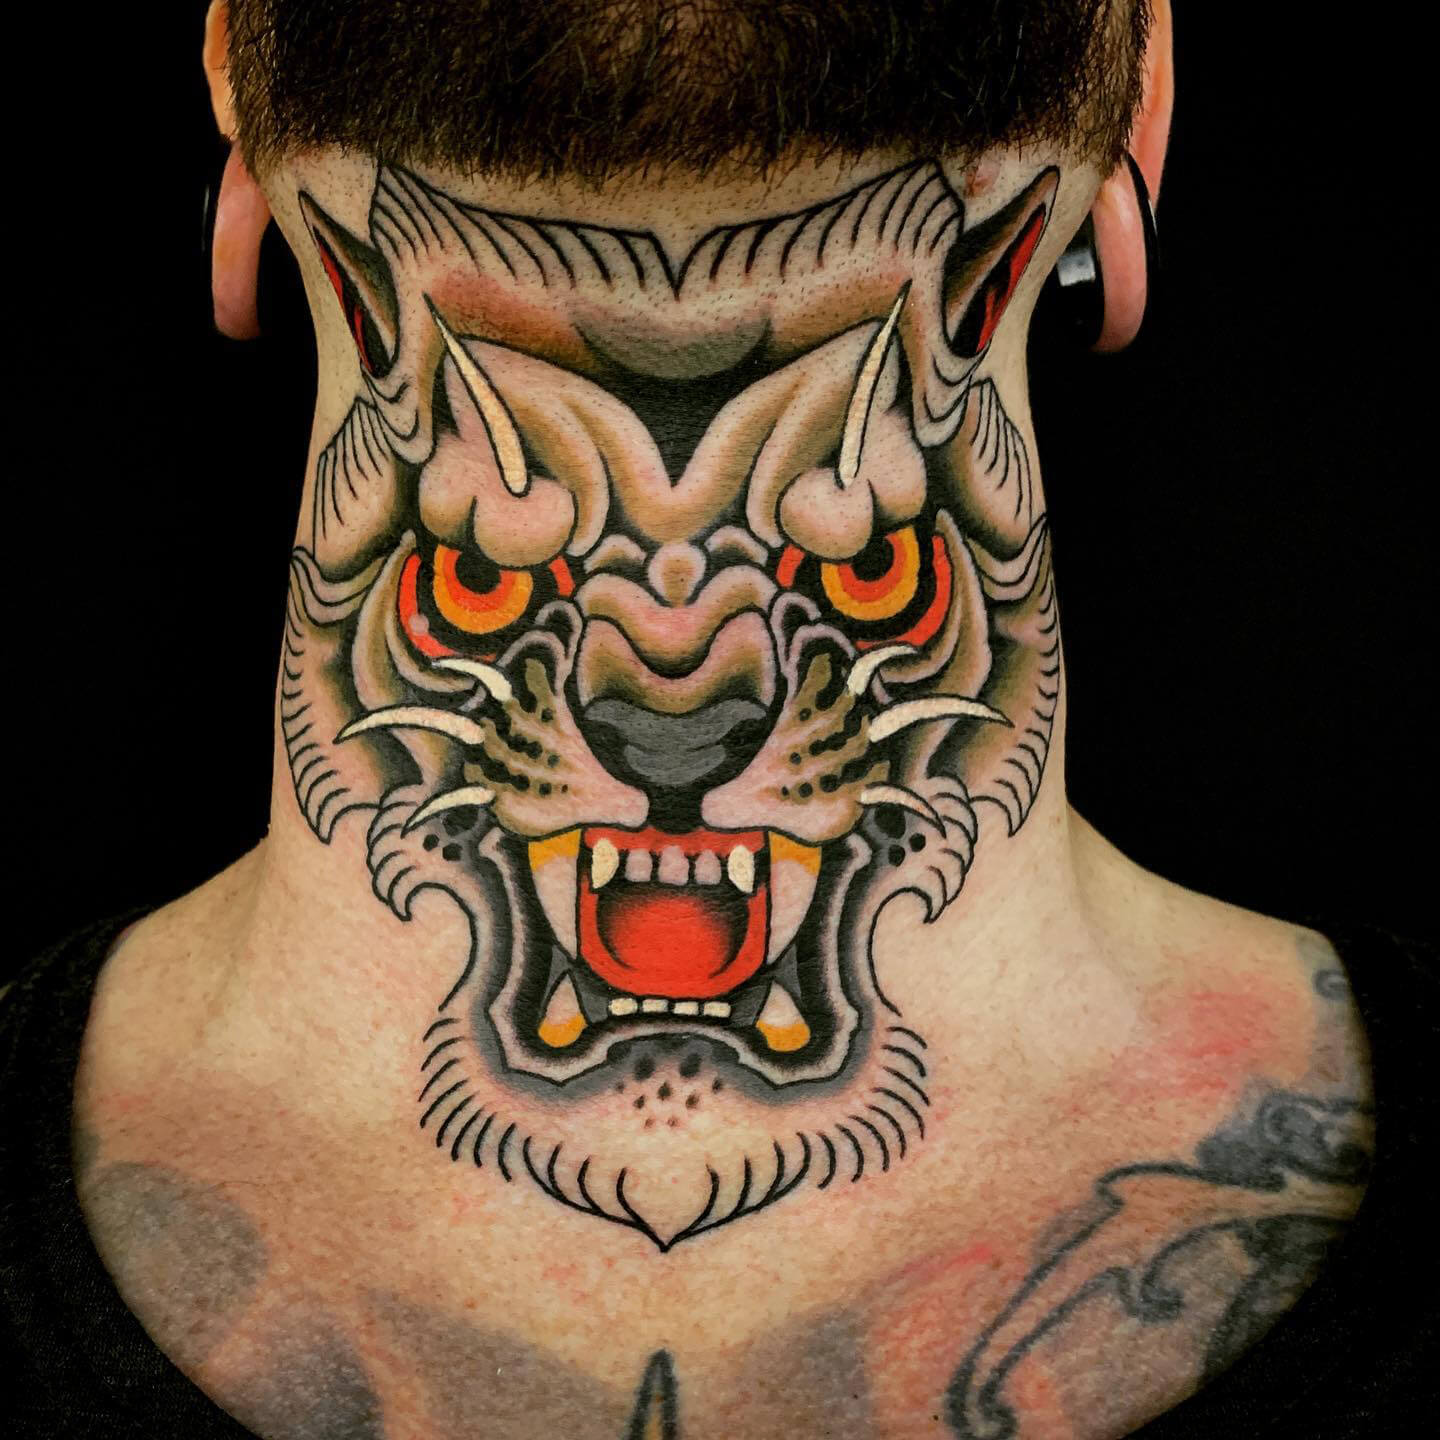 Tattoo uploaded by Chazz hysell • Tiger style cover up #tiger #tigertattoo  #tigerhead #coverup #coveruptattoo #CoverUpTattoos #necktattoo #neck  #traditional #traditionaltattoo #traditionaltattoos #TraditionalArtist  ##color #blastover • Tattoodo